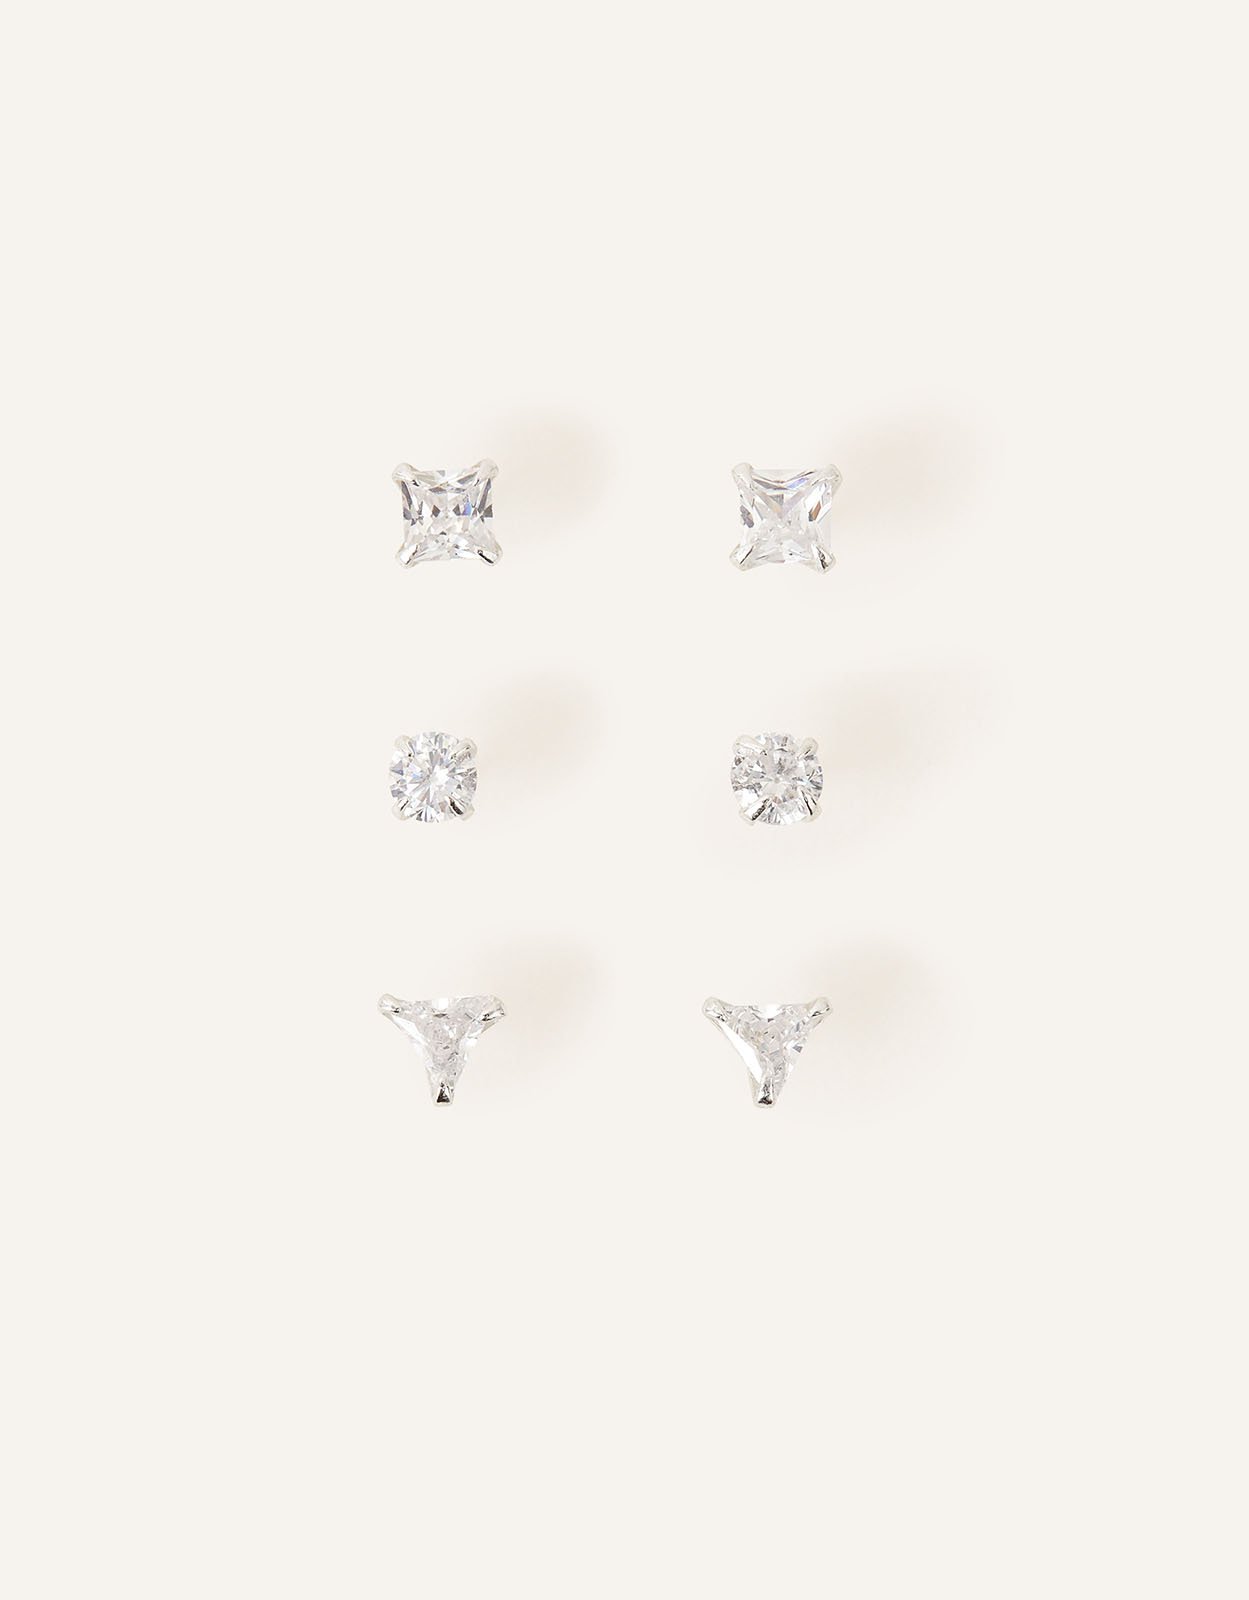 Accessorize Women's Sterling Silver Crystal Studs Set of Three, Size: One Size